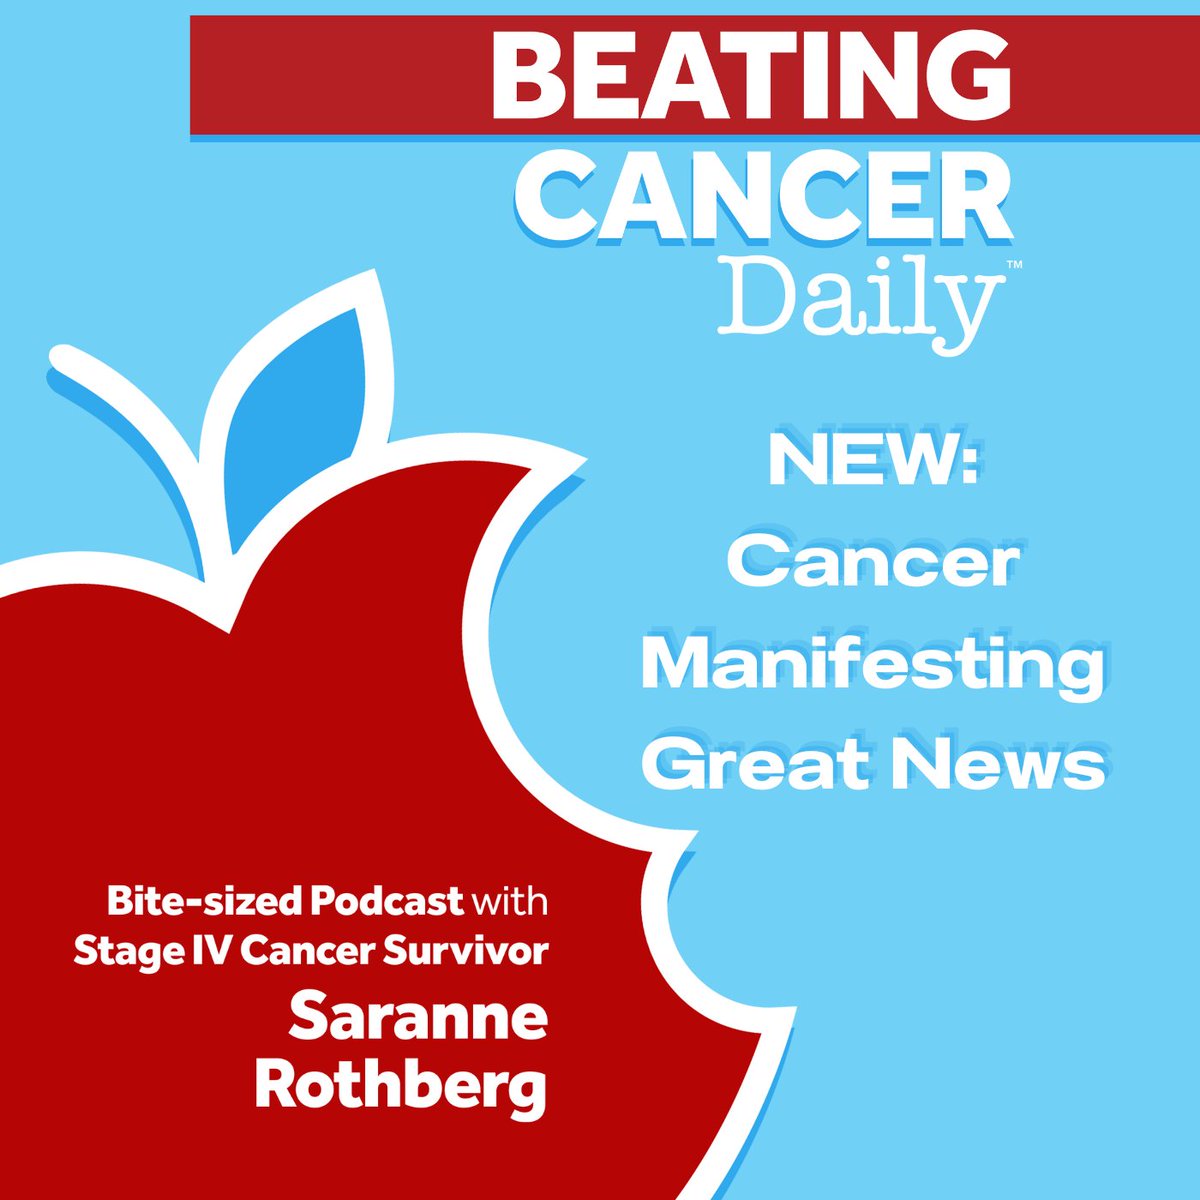 Today on #BeatingCancerDaily, Fan Favorite: Cancer Manifesting Great News
Listen wherever you listen to podcasts. 
ComedyCures.org

#ComedyCures #LaughDaily #InstaLaugh #laughtherapy #NonProfit #nonprofitlife #standupcomedian #survivor #remission #cancersurvivor